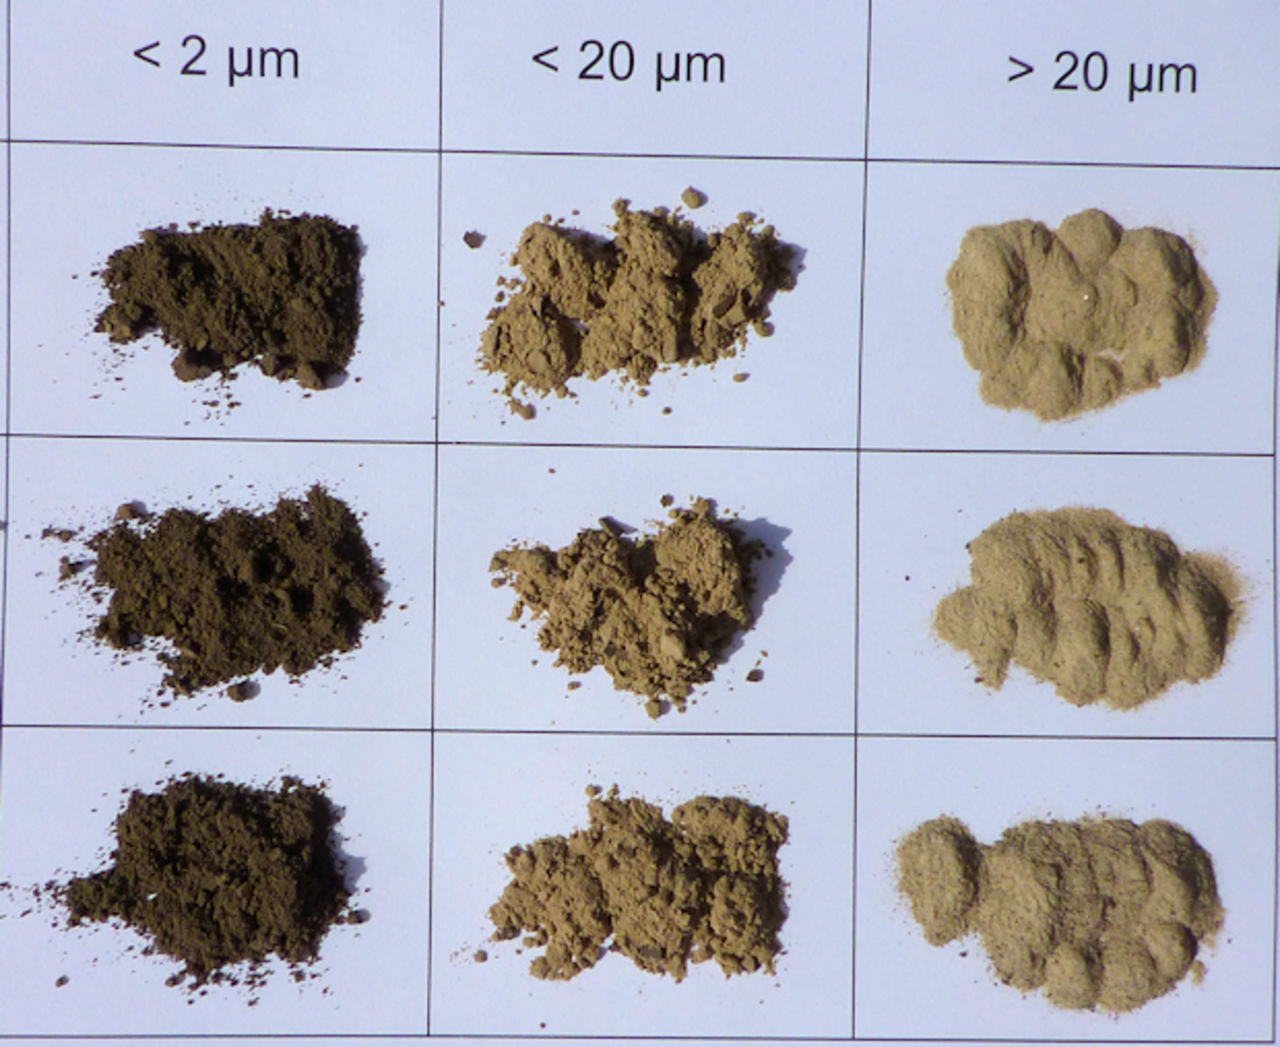 Which soil particle size fractions (clay: < 2 µm; fine silt: < 20 µm; coarse silt and sand: > 20 µm) are preferentially colonized by waste-water bacteria?